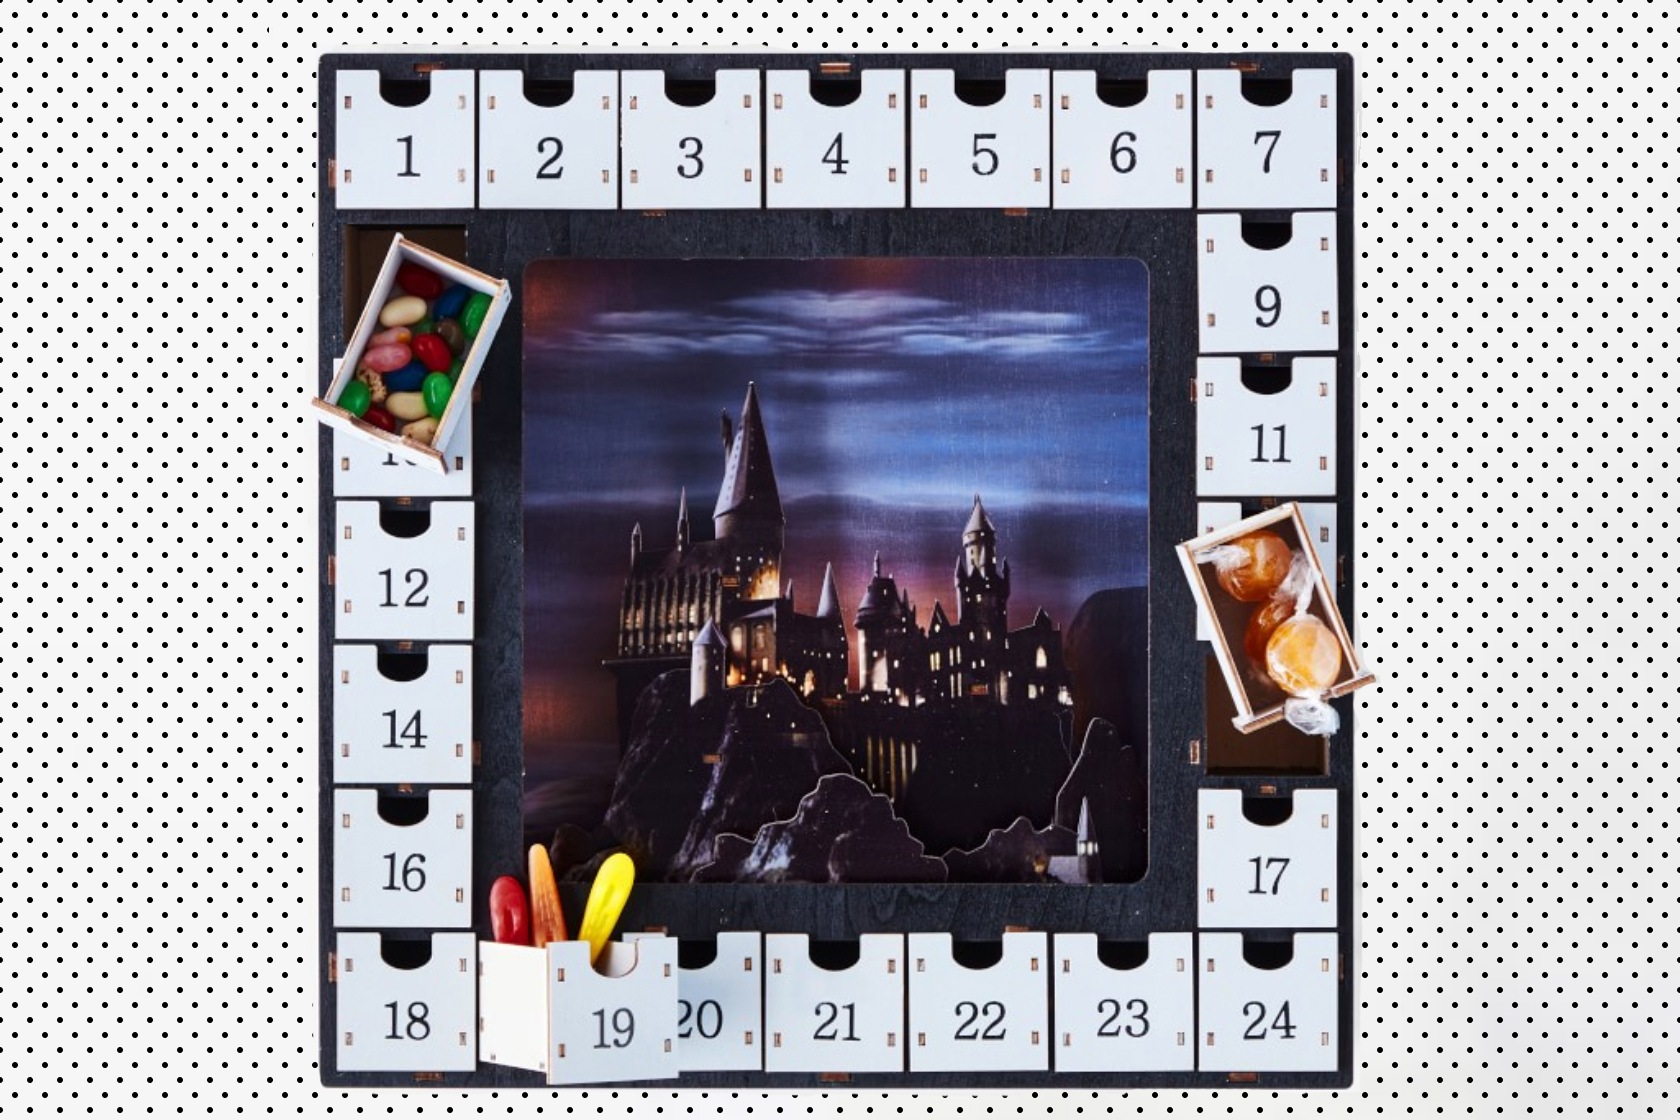 This Harry Potter luxe Advent calendar is perfect for candy loving wizards